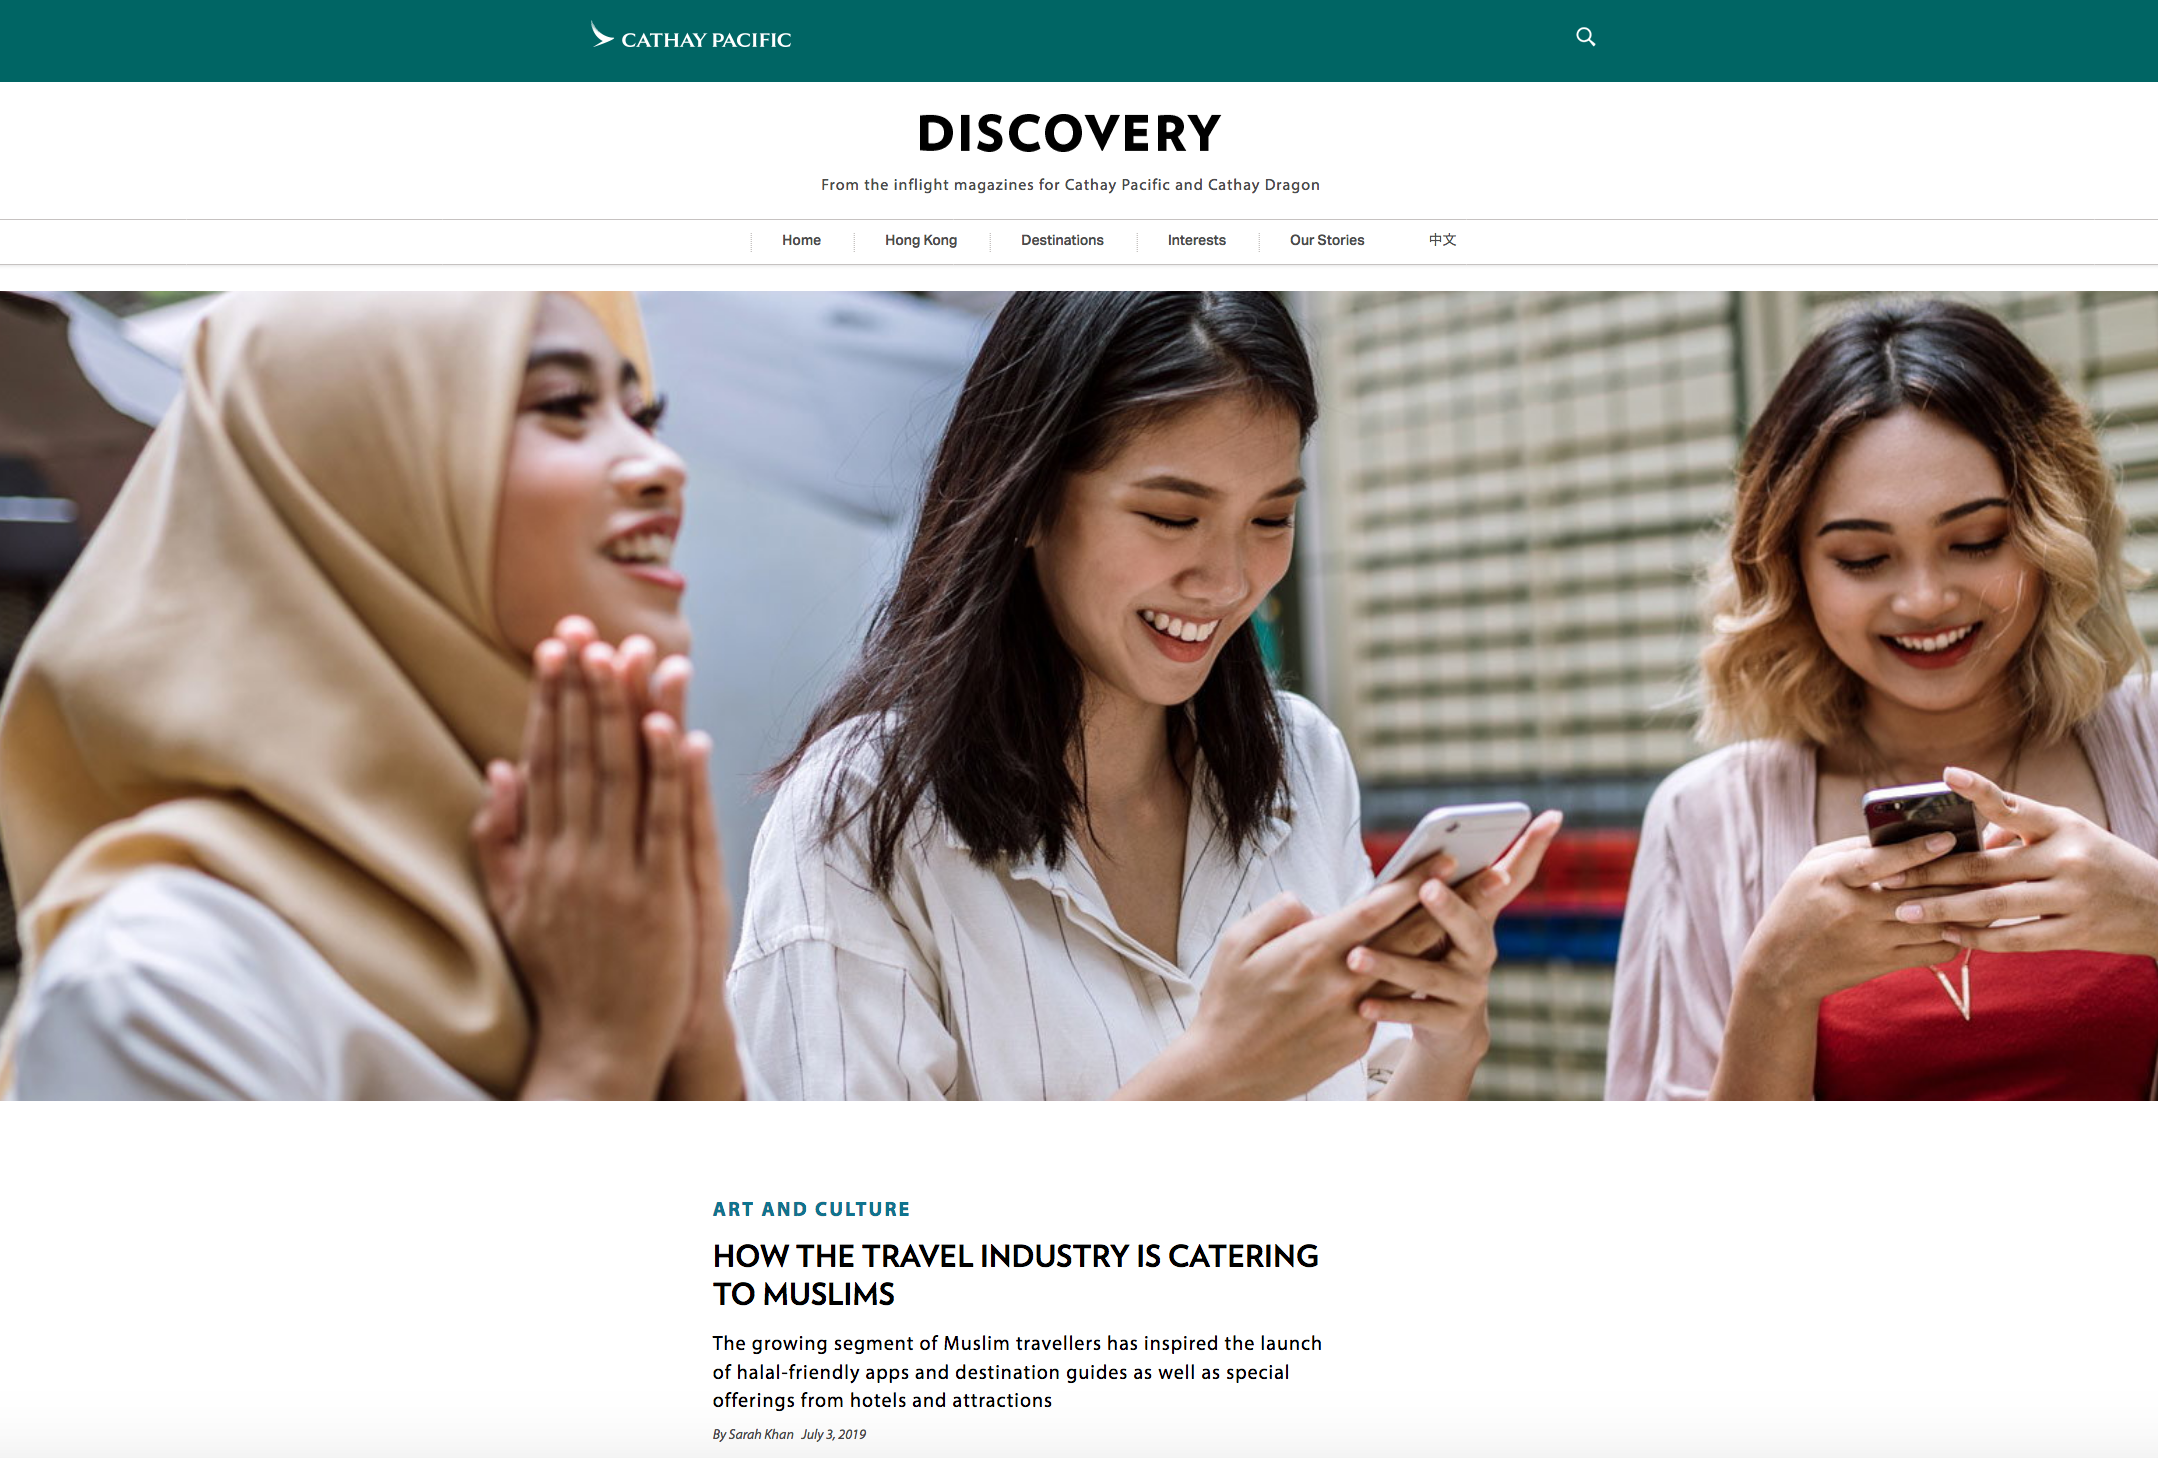 Cathay Pacific: How the Travel Industry is Catering to Muslims